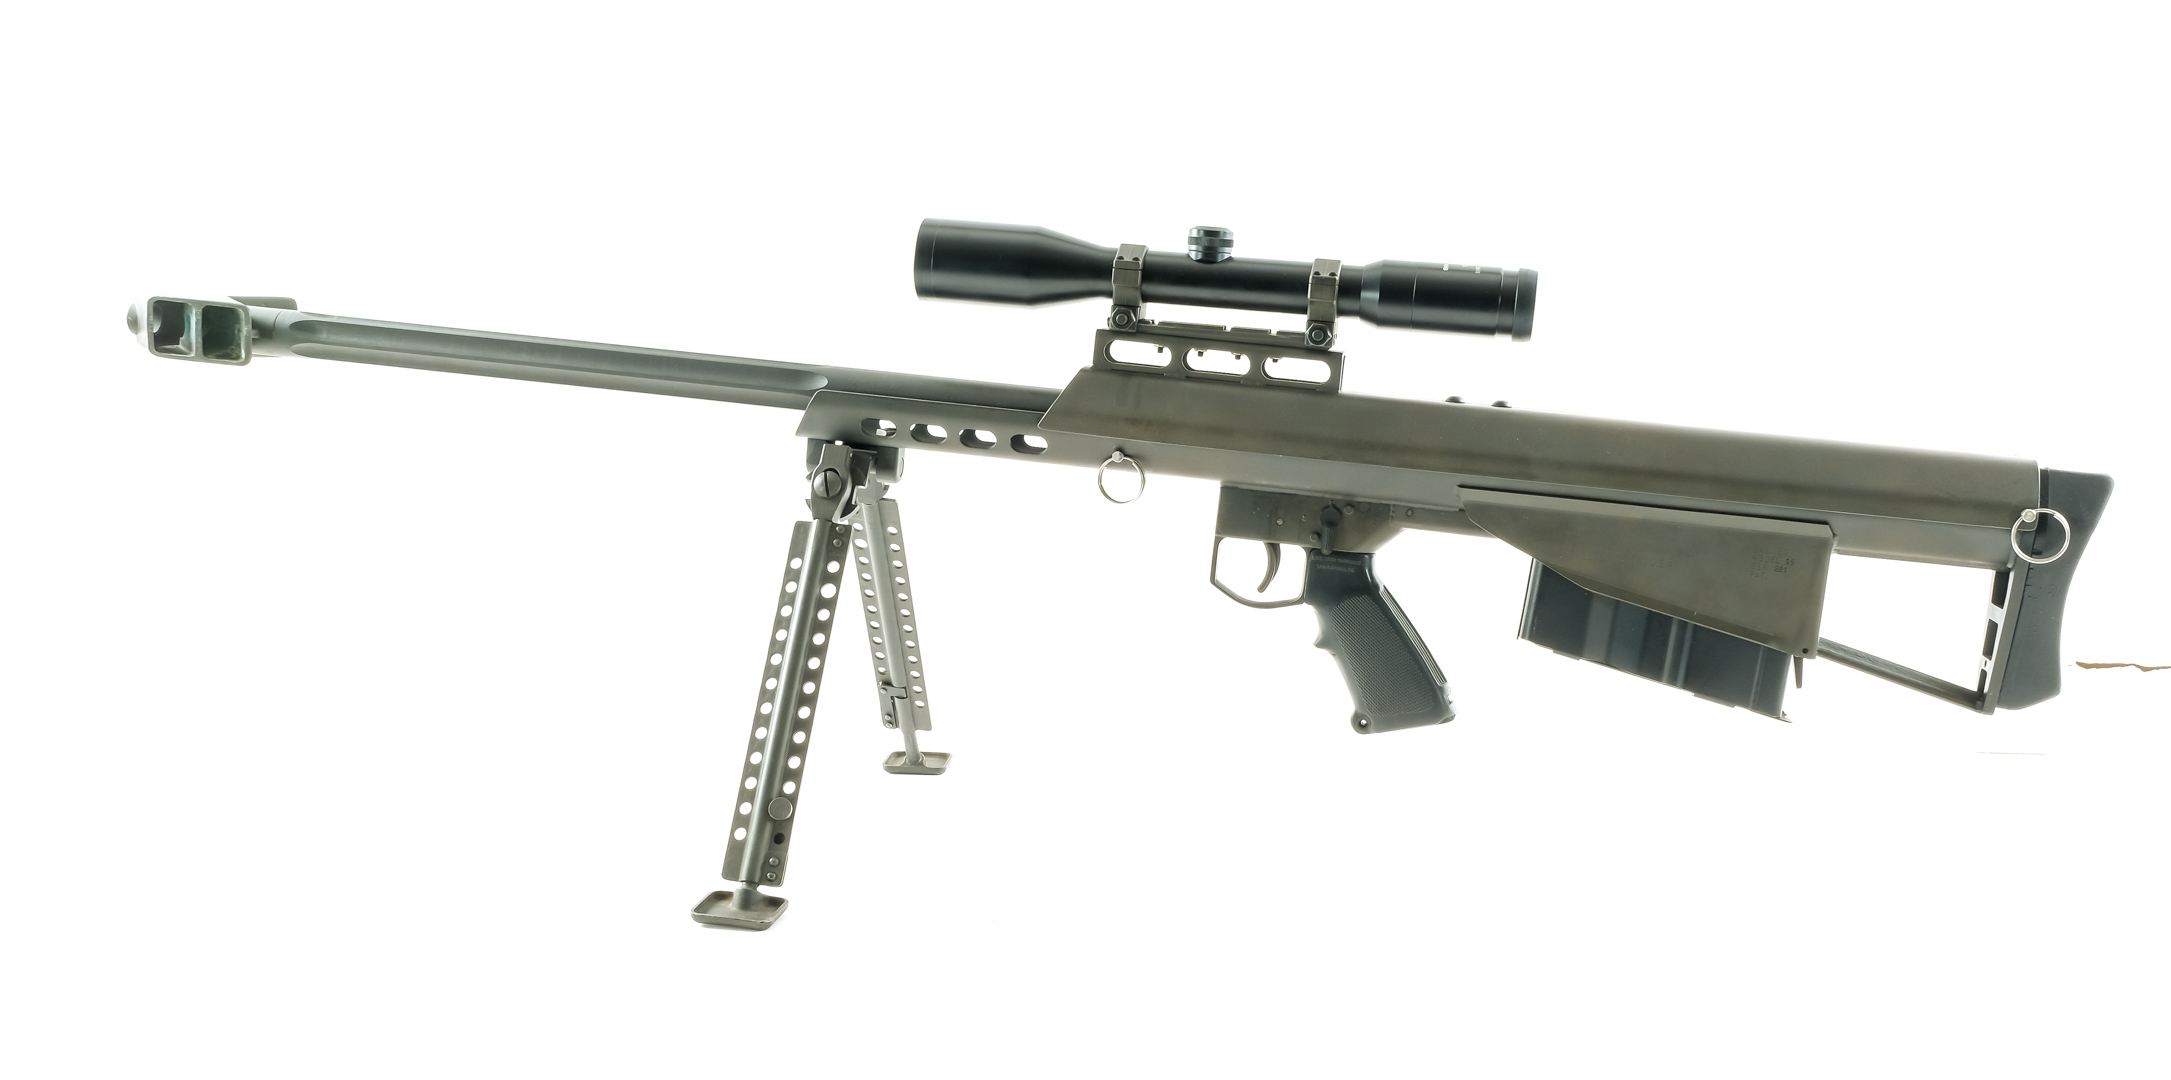 Tennessee Declares the Massive .50 Cal Barrett M82 Rifle Its Official State  Firearm